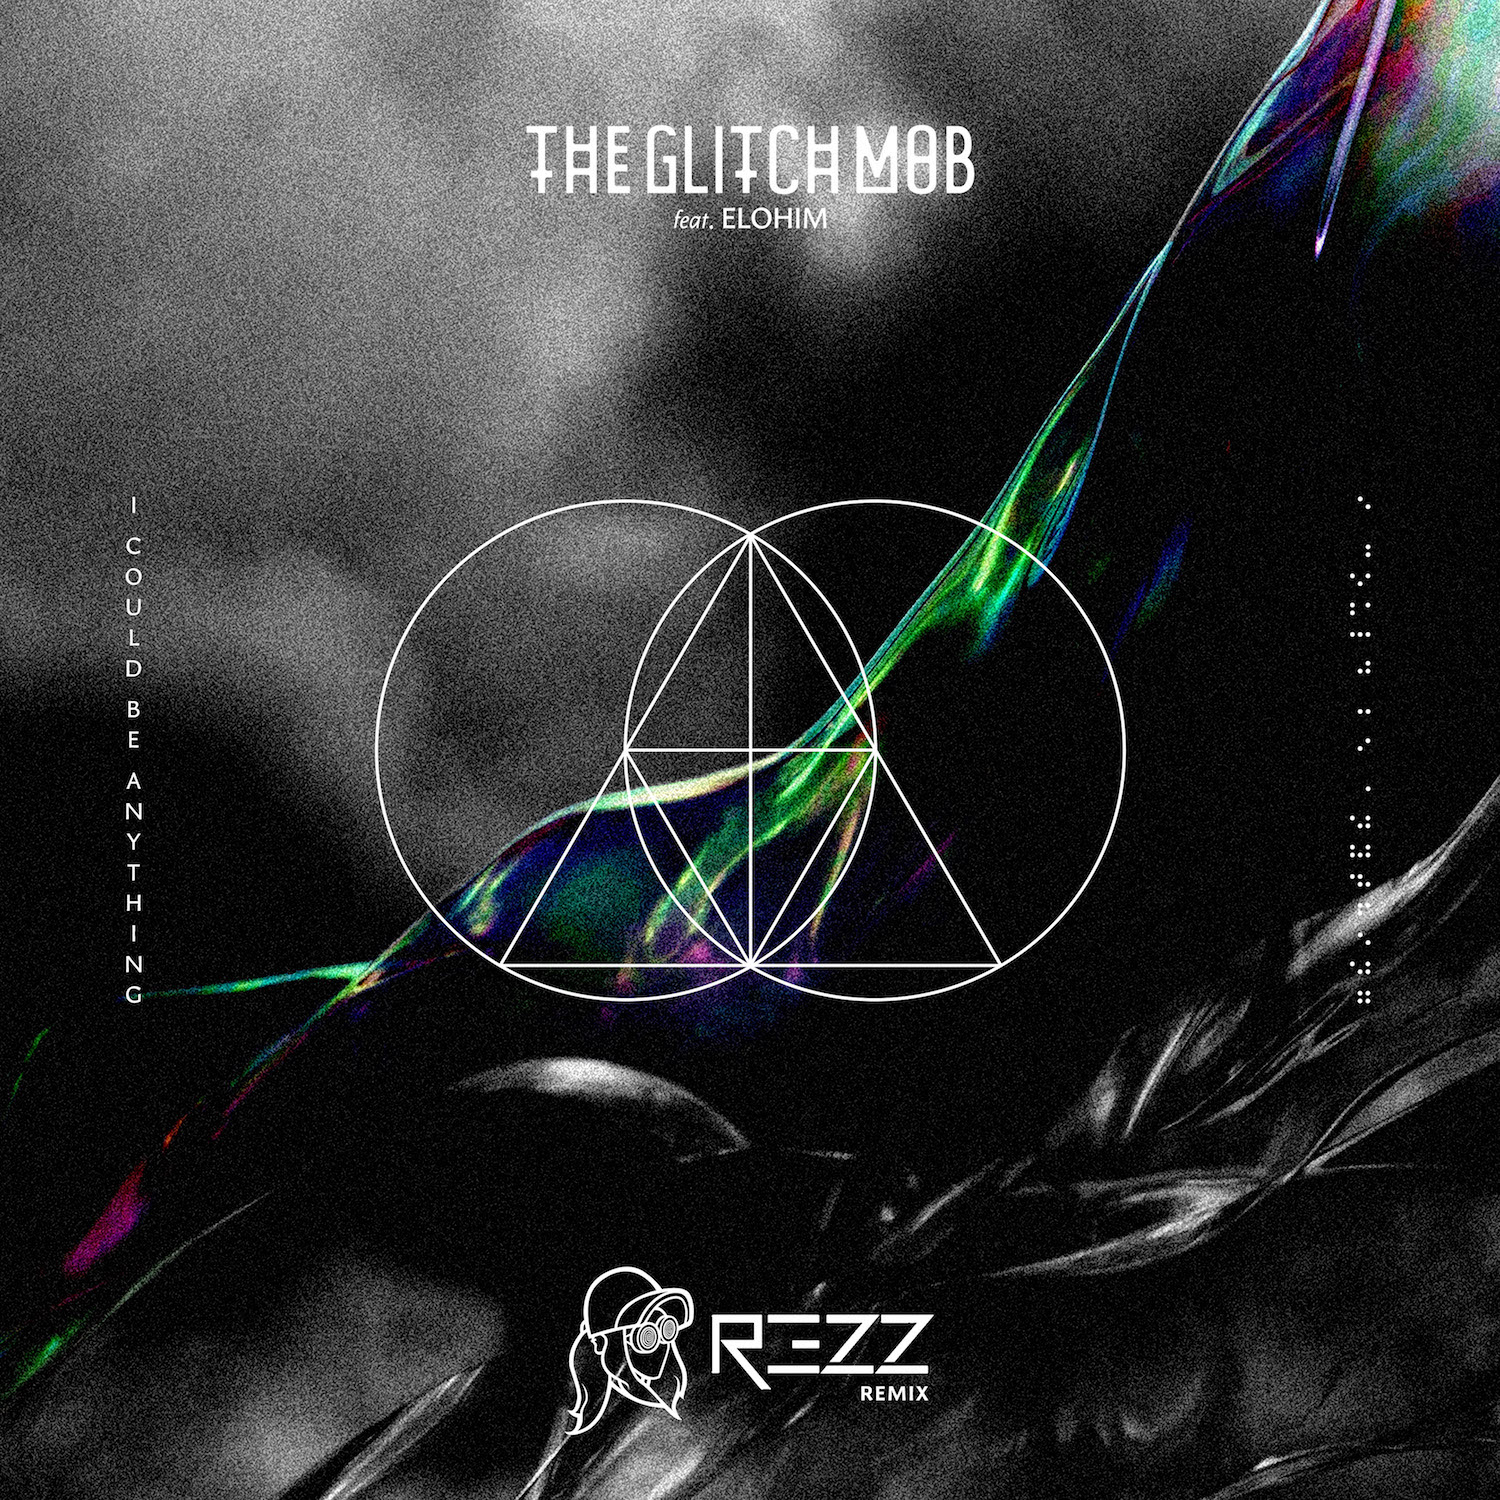 REZZ Flips The Glitch Mob’s “I Could Be Anything” into a Electronica Odyssey